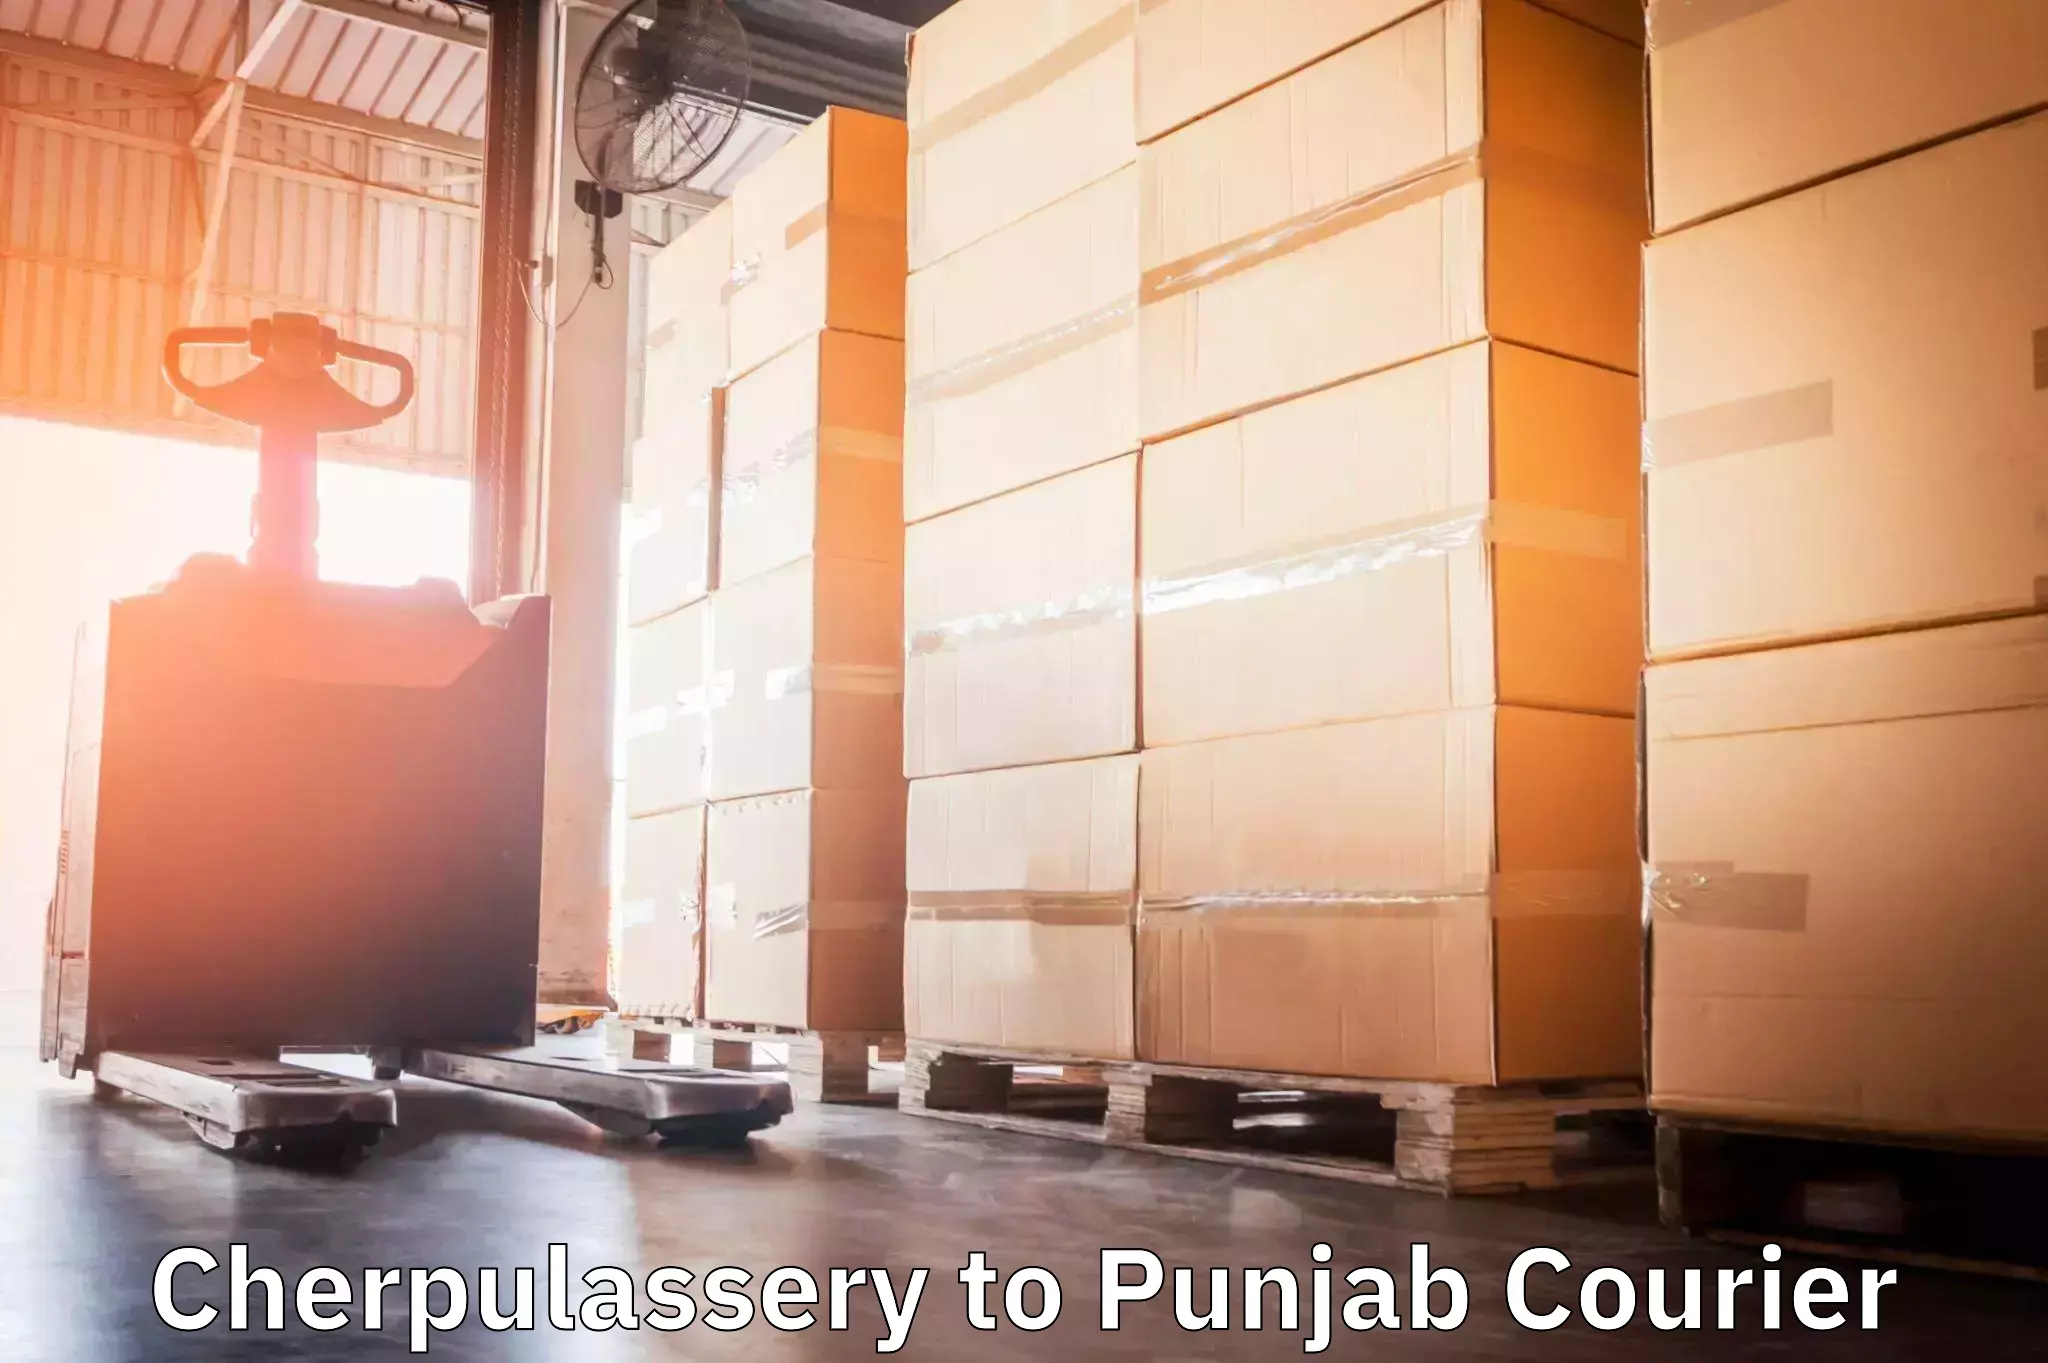 Sustainable delivery practices Cherpulassery to Punjab